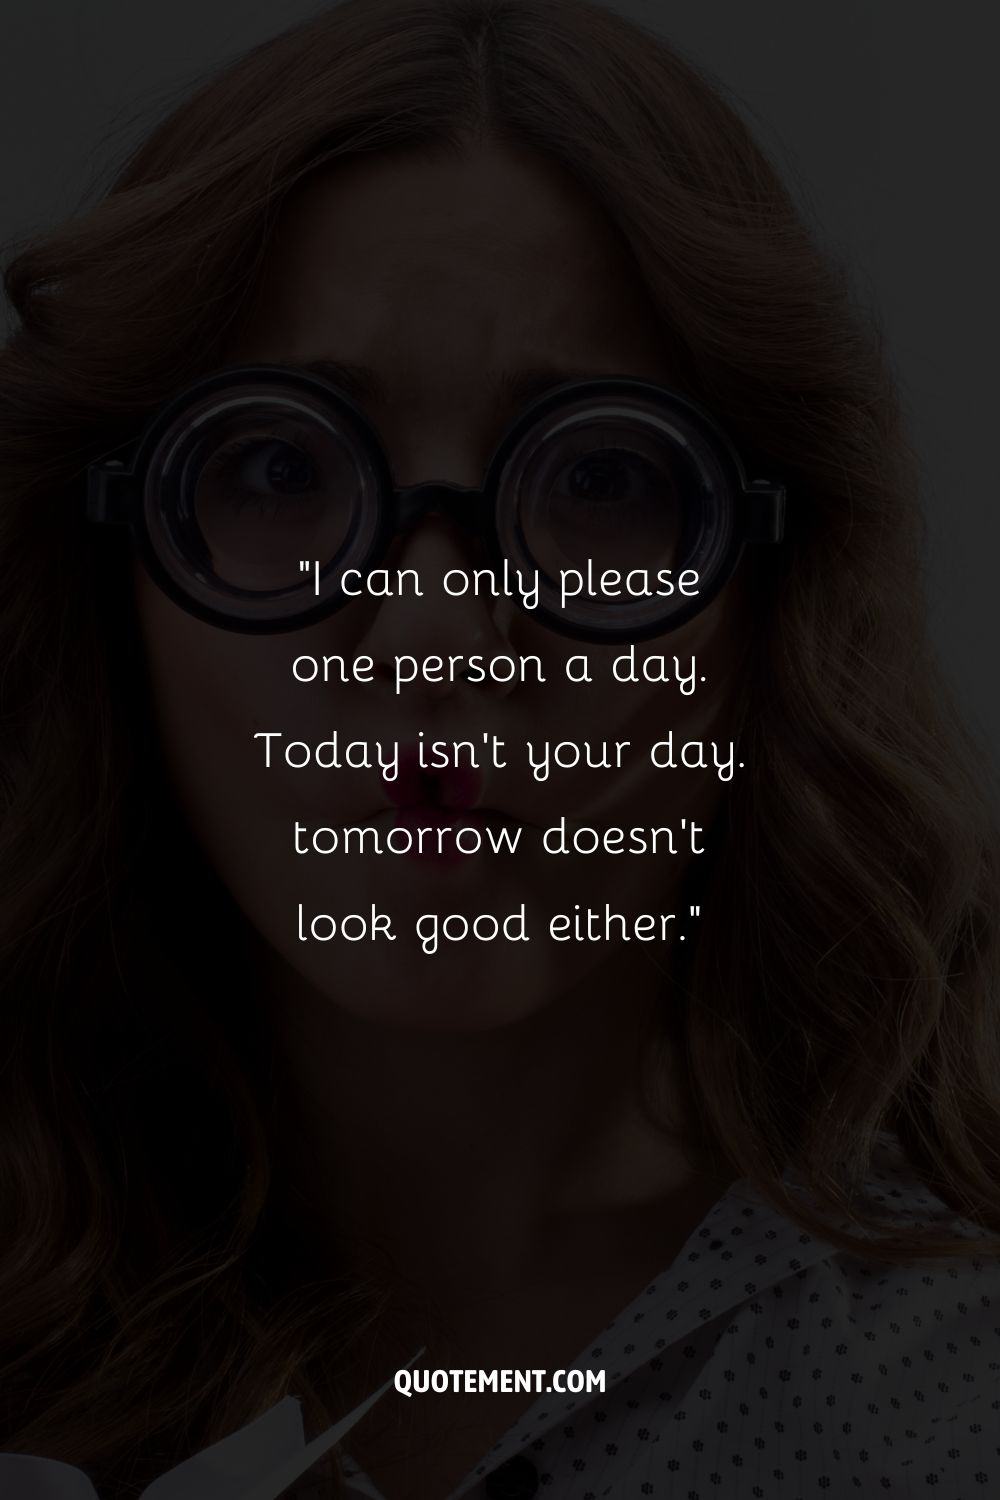 “I can only please one person a day. Today isn’t your day. tomorrow doesn’t look good either.”